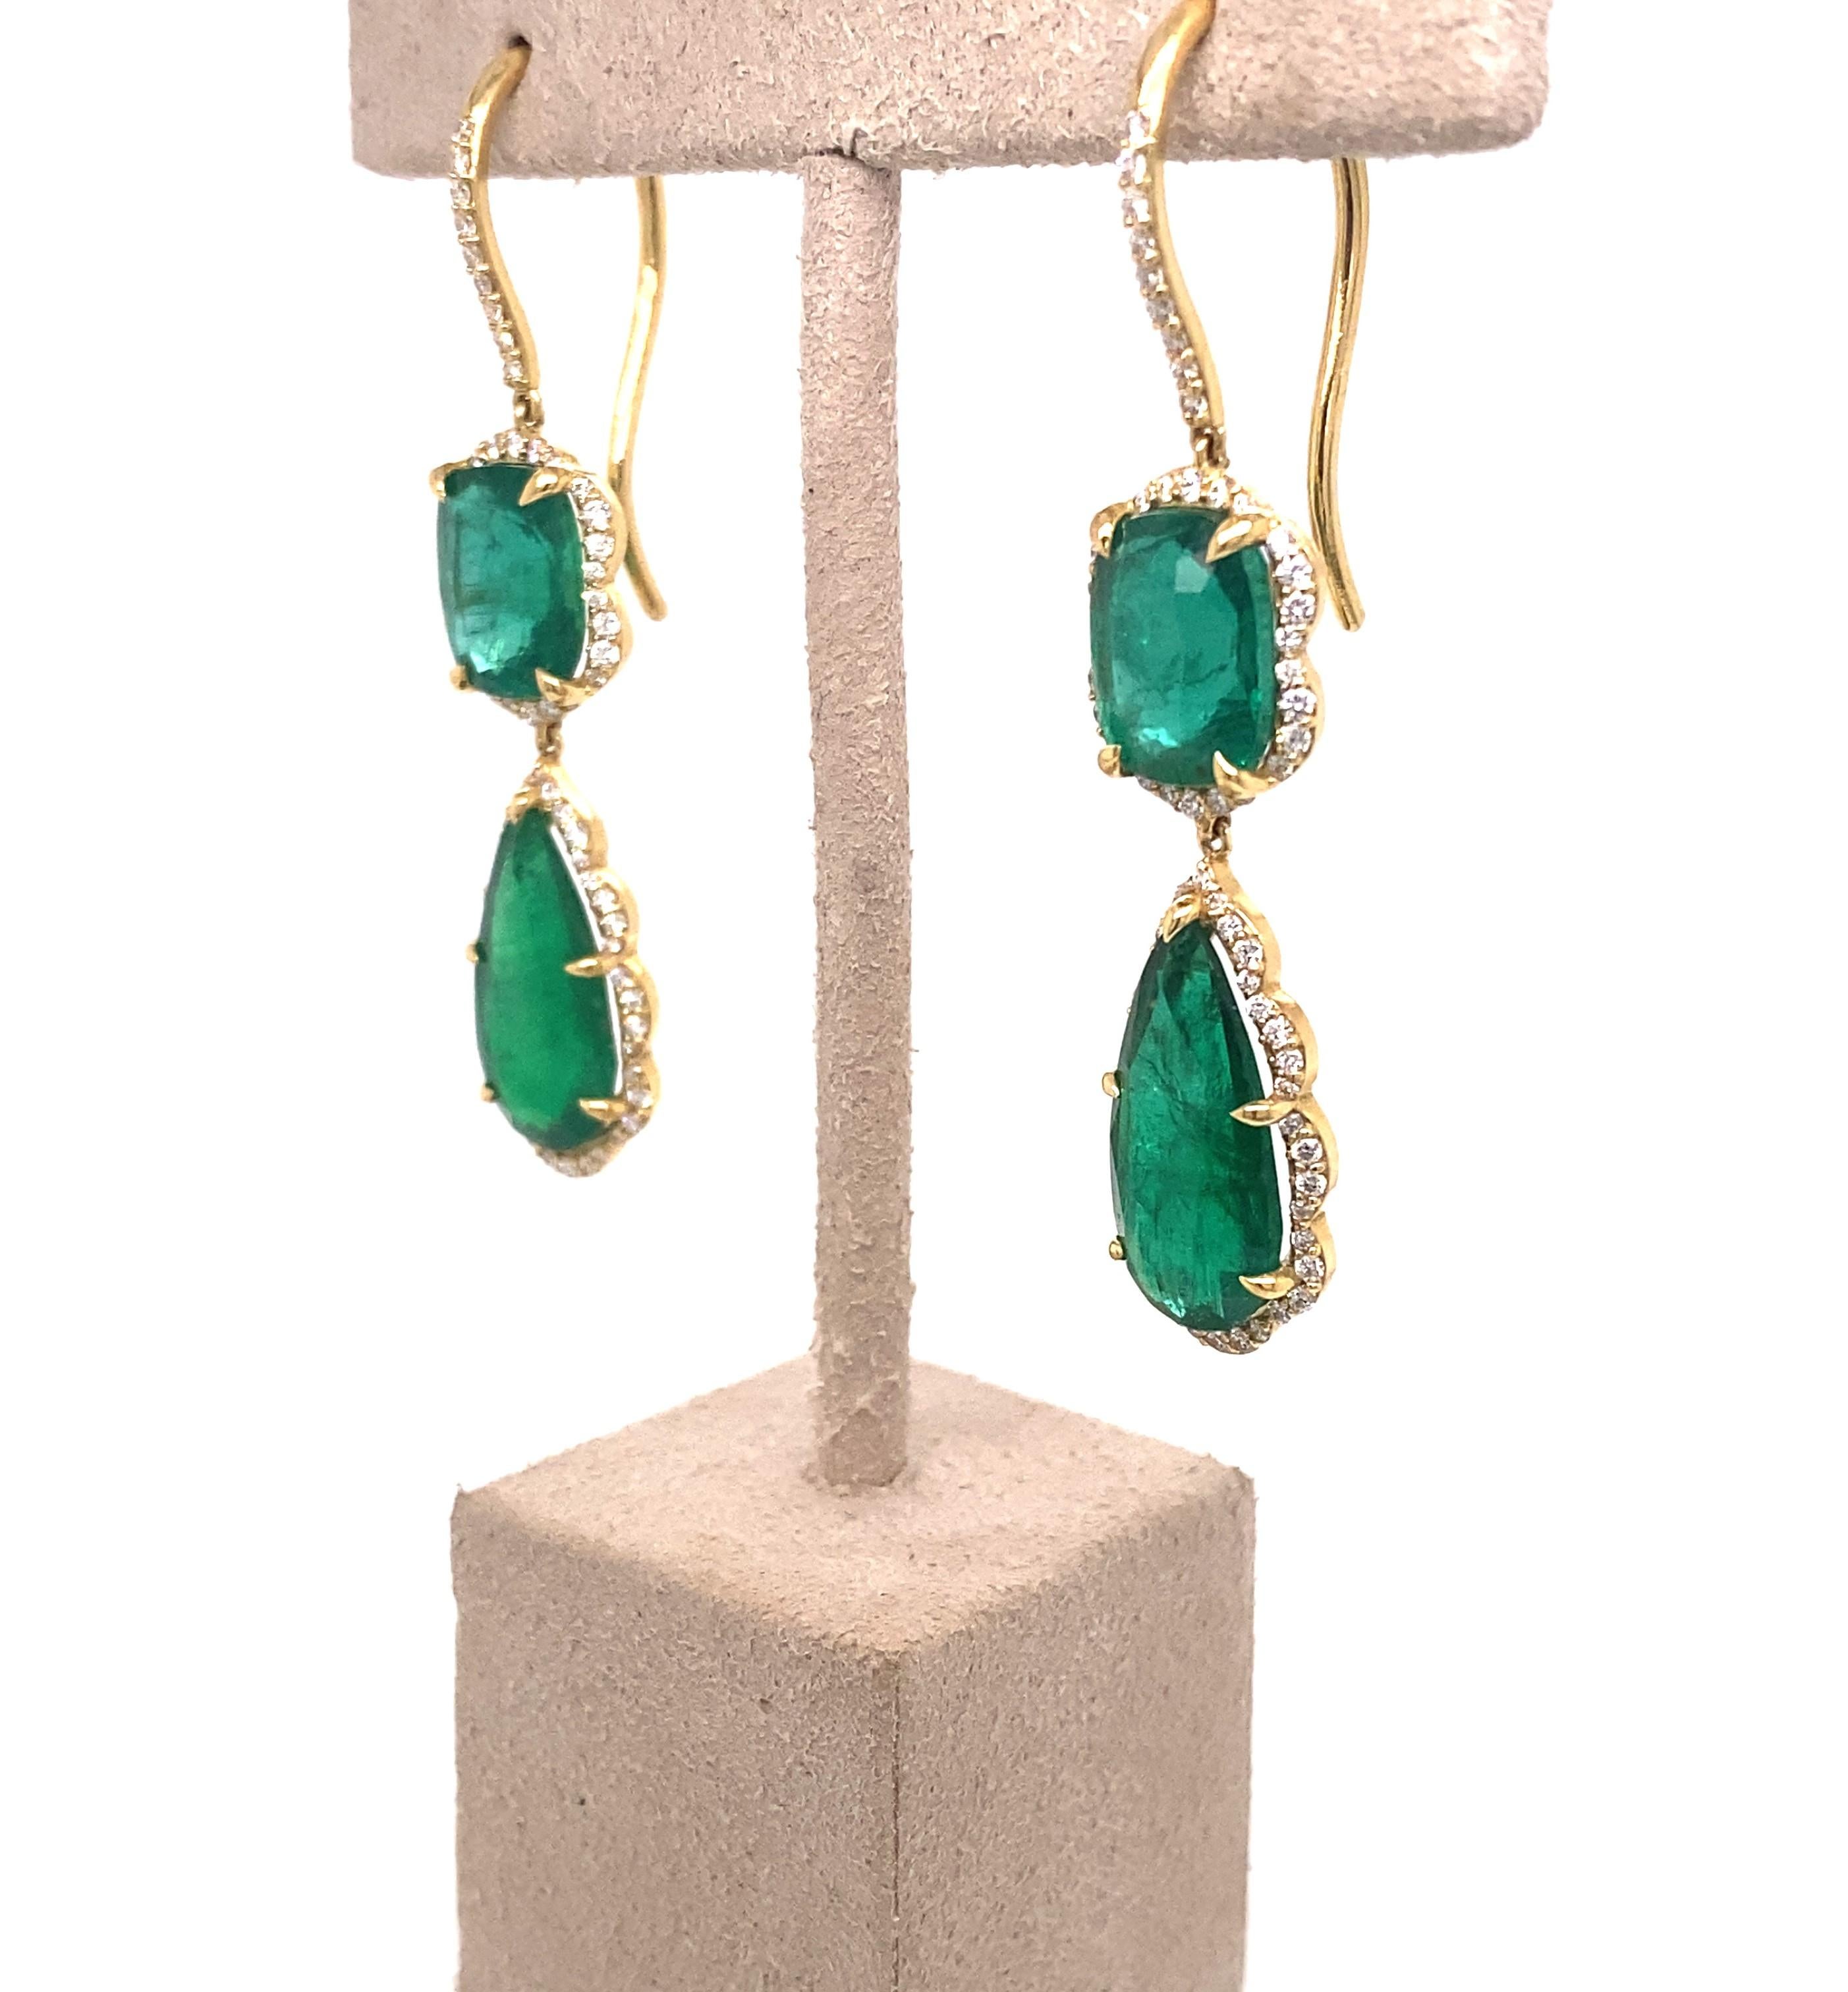 These one of a kind dangle earrings feature four Emeralds from Zambia at a total weight of 13.61 carats.  They are surrounded by a halo of round diamonds in a scallop pattern and set in 18 karat yellow gold. The french wire back has round diamonds